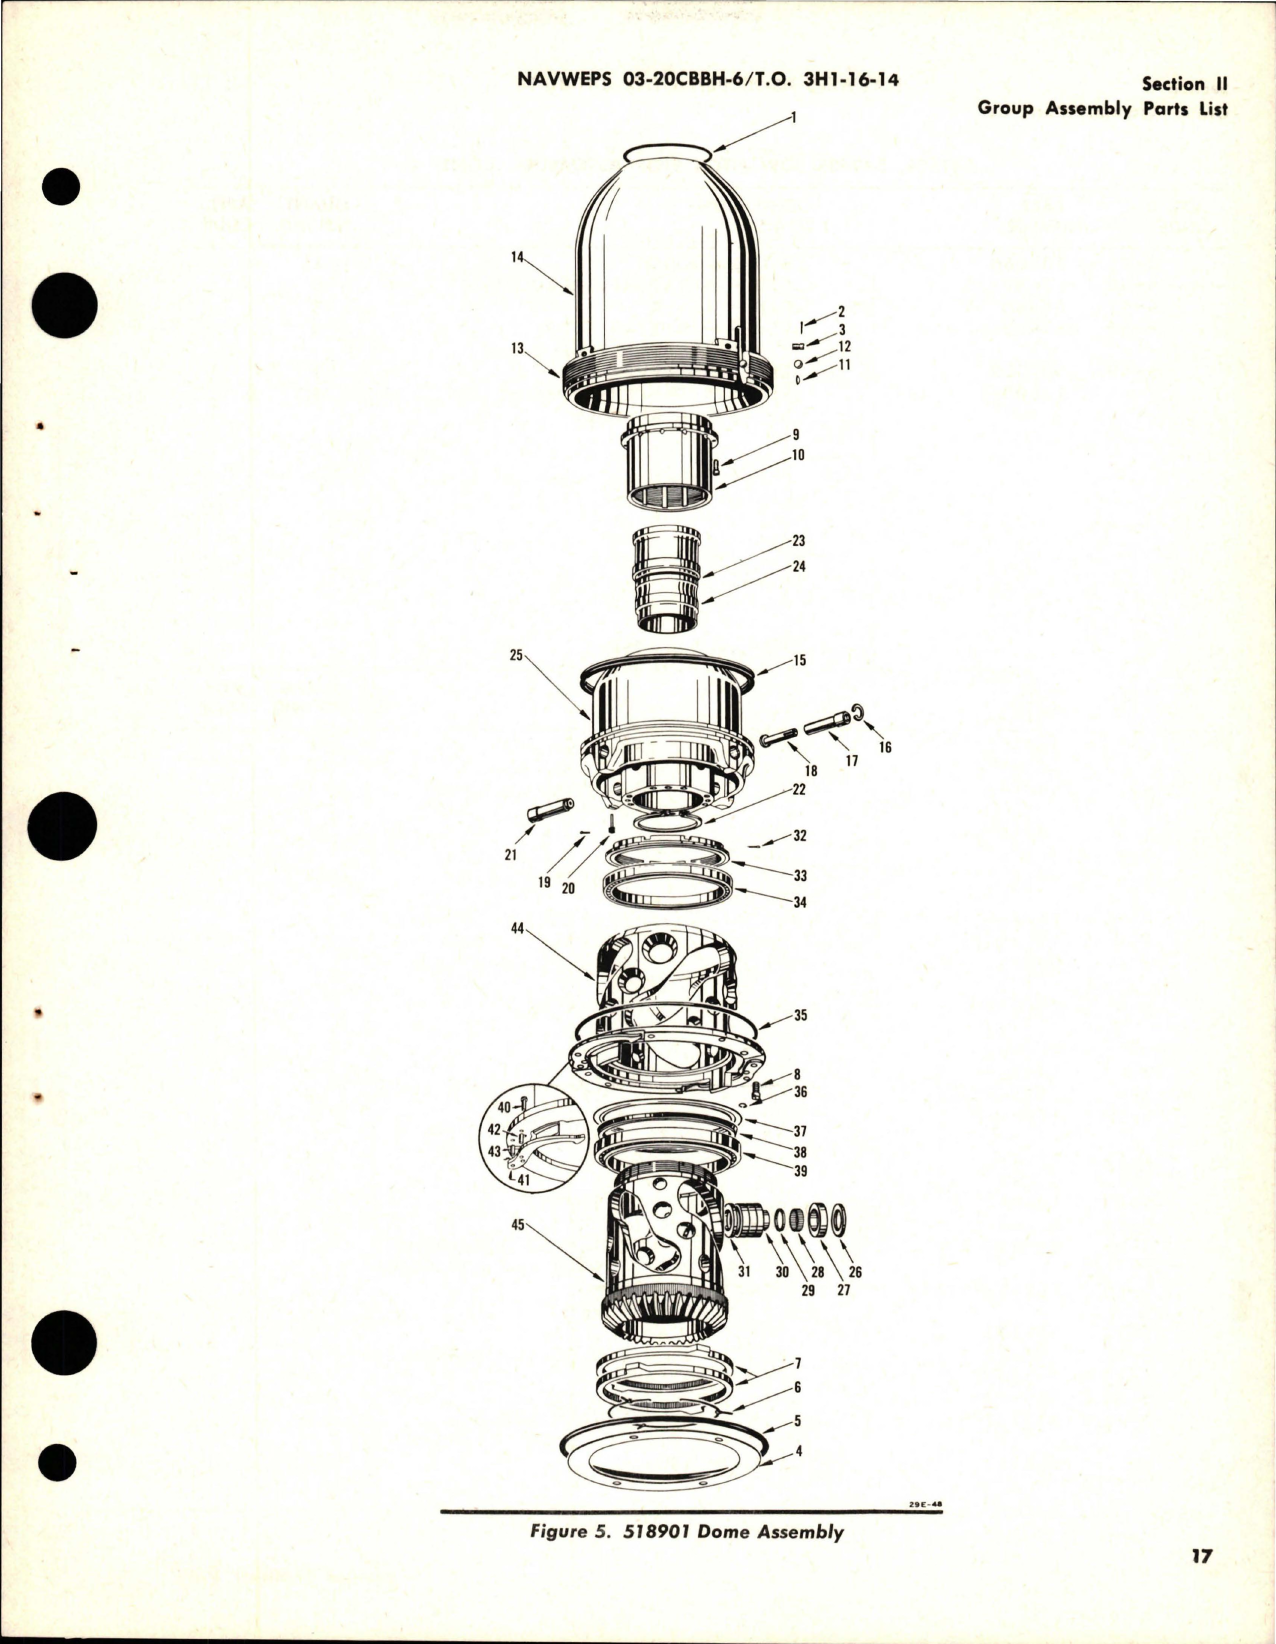 Sample page 9 from AirCorps Library document: Illustrated Parts Breakdown for Variable Pitch Propeller and Brush Block Bracket Assembly